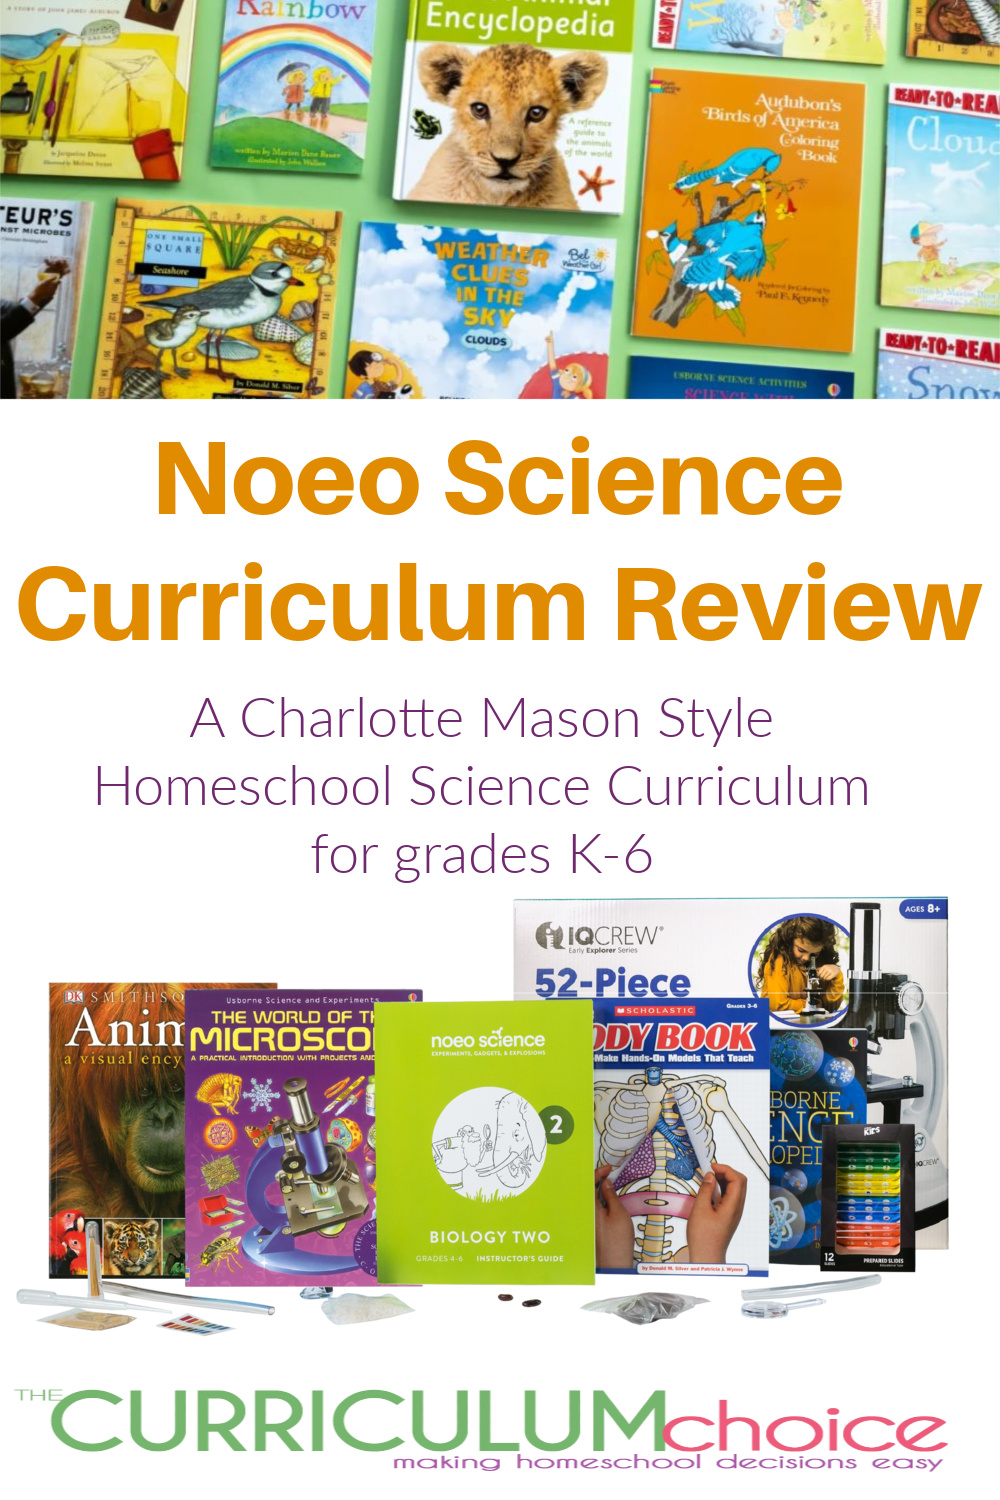 Noeo Science is a Charlotte Mason style, literature based science curriculum offered in biology, chemistry or physics for grades K-6. A review from The Curriculum Choice.